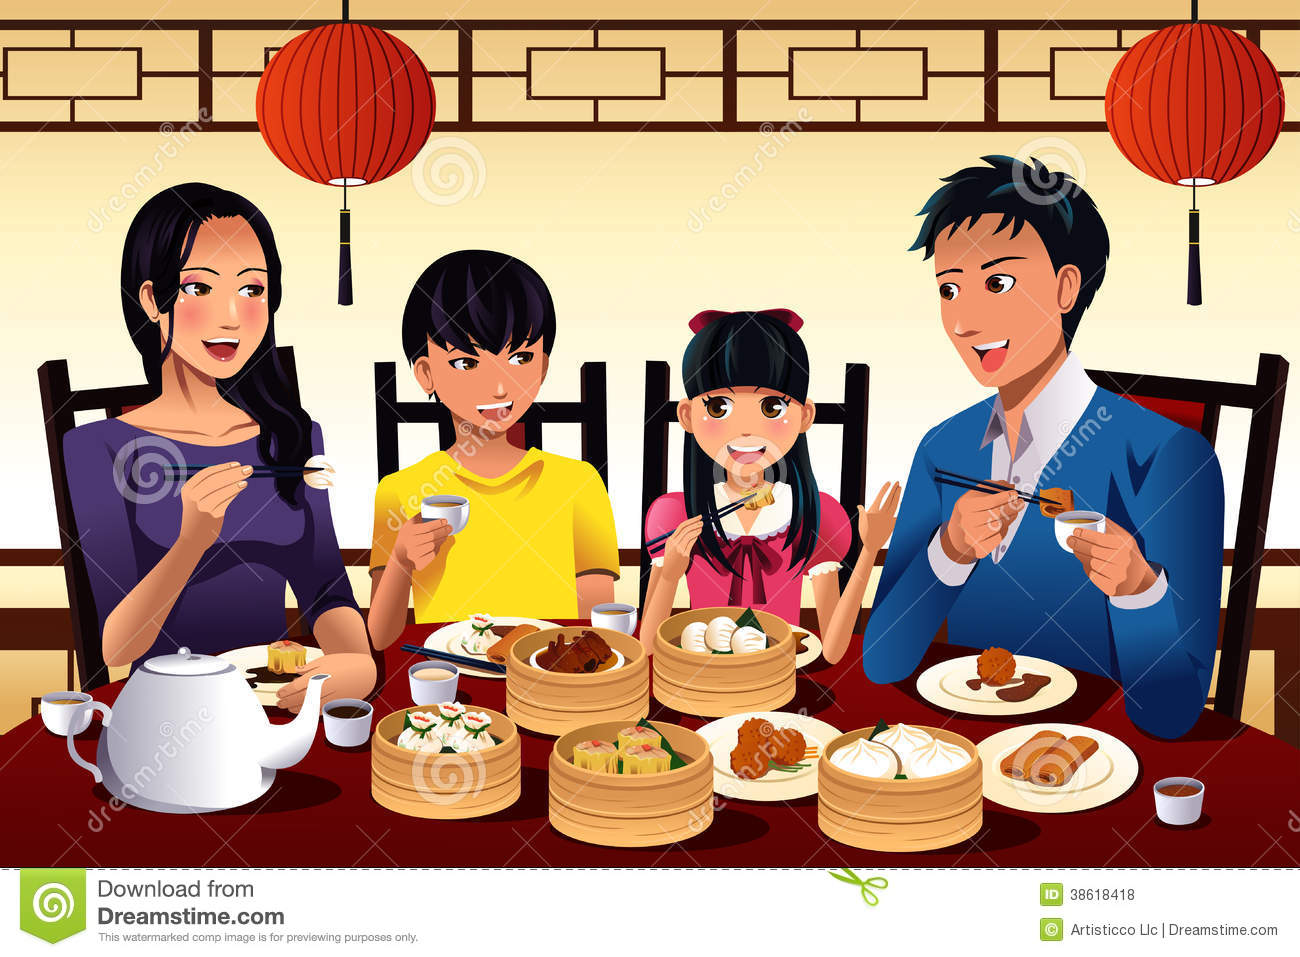 Illustration Of Chinese Family Eating Dim Sum At A Chinese Restaurant